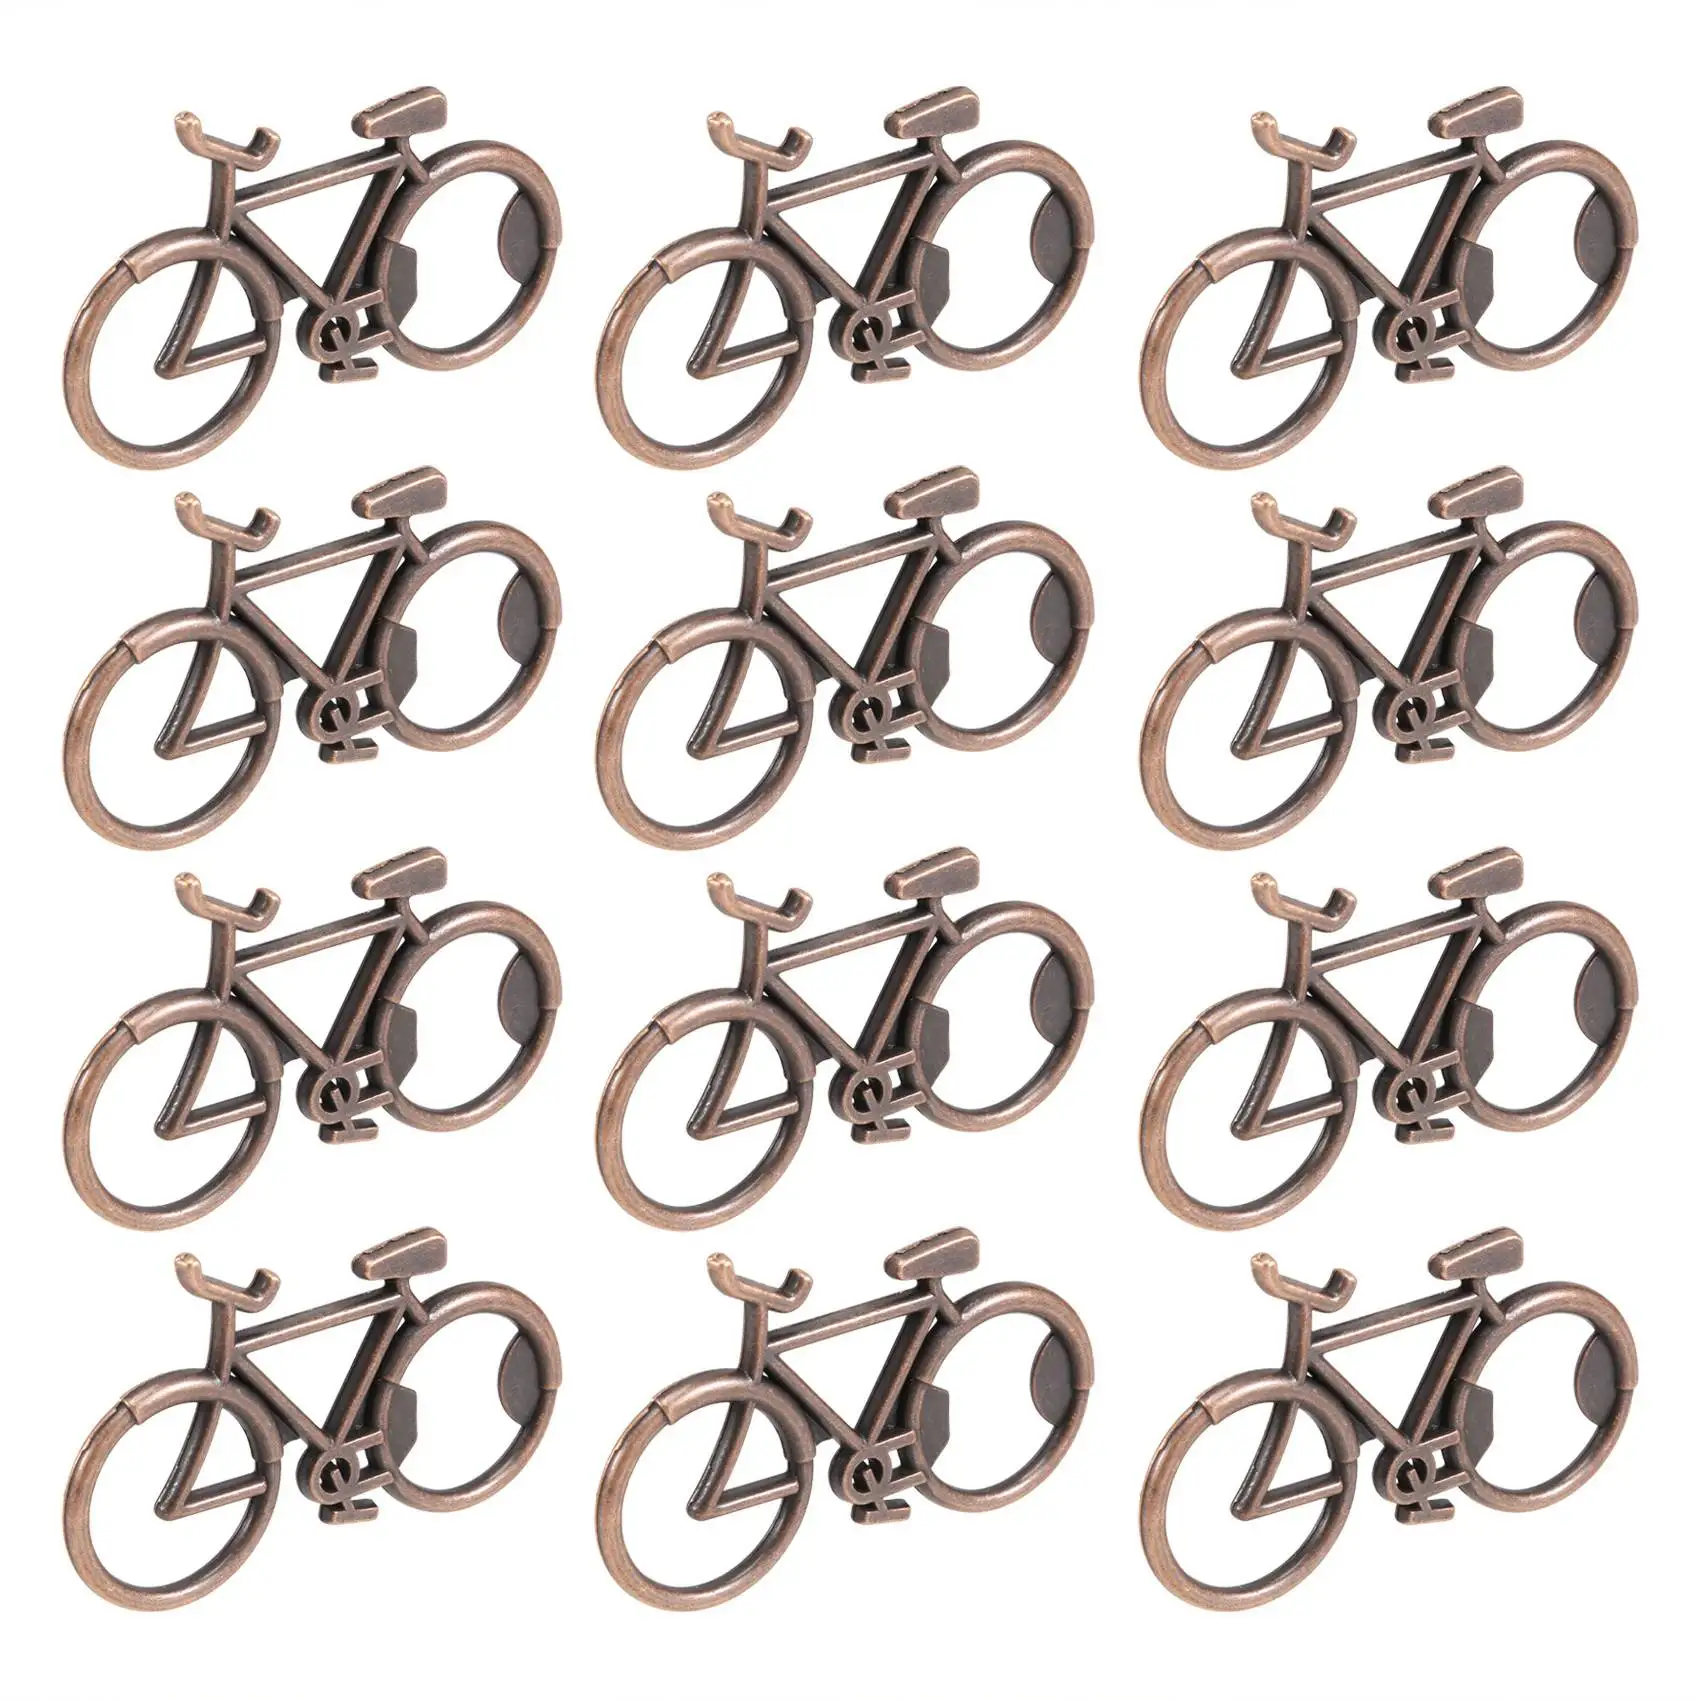 

12 Pcs Bicycle Bottle Opener for Wedding Party Souvenir Gift,Metal Beer Bottle Opener Party Favors Gifts(Antique Bronze)